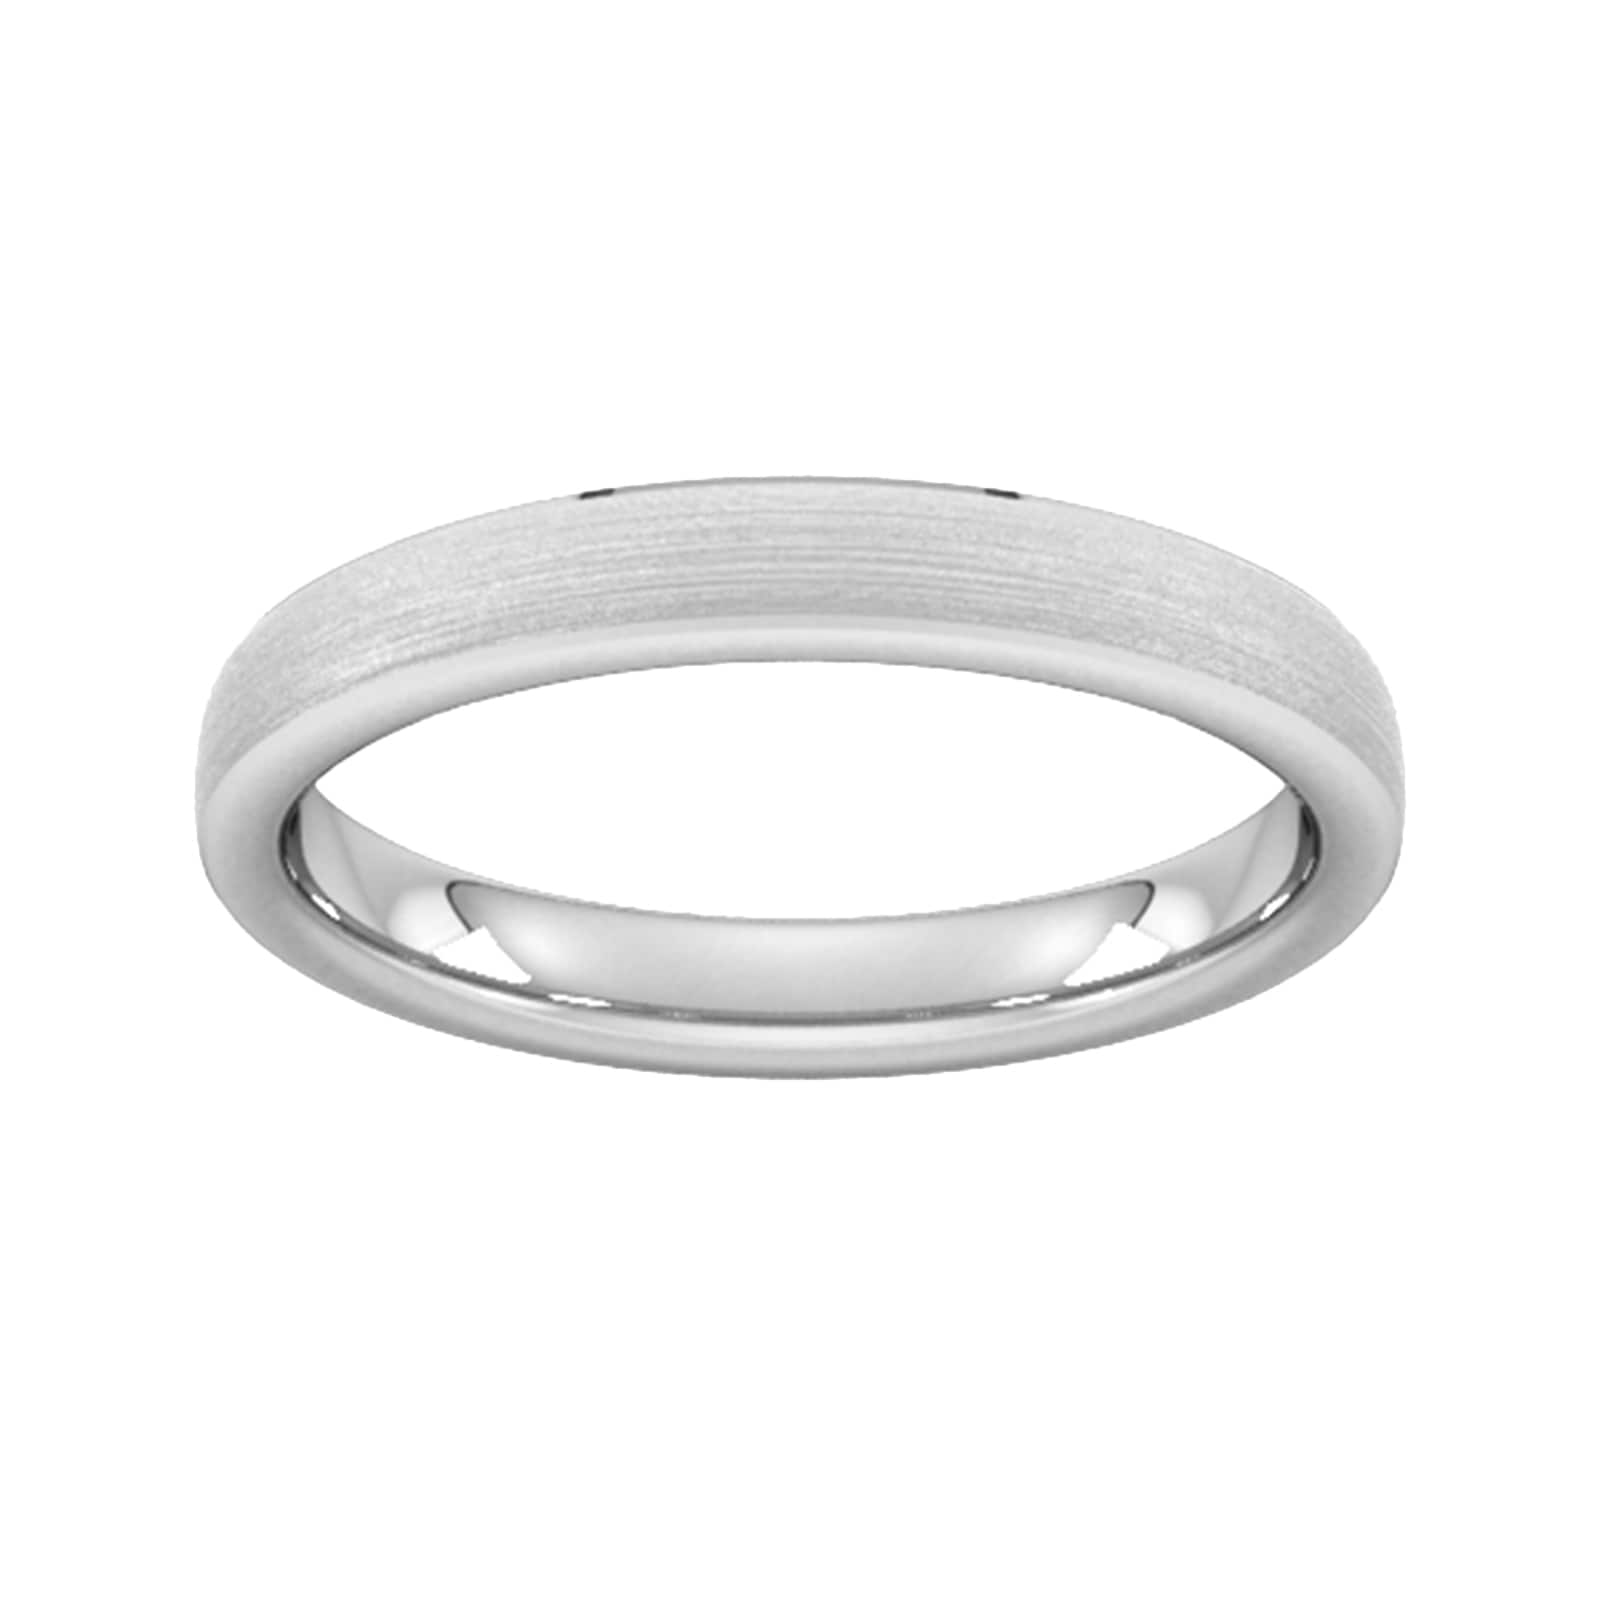 3mm Traditional Court Standard Polished Chamfered Edges With Matt Centre Wedding Ring In 9 Carat White Gold - Ring Size R